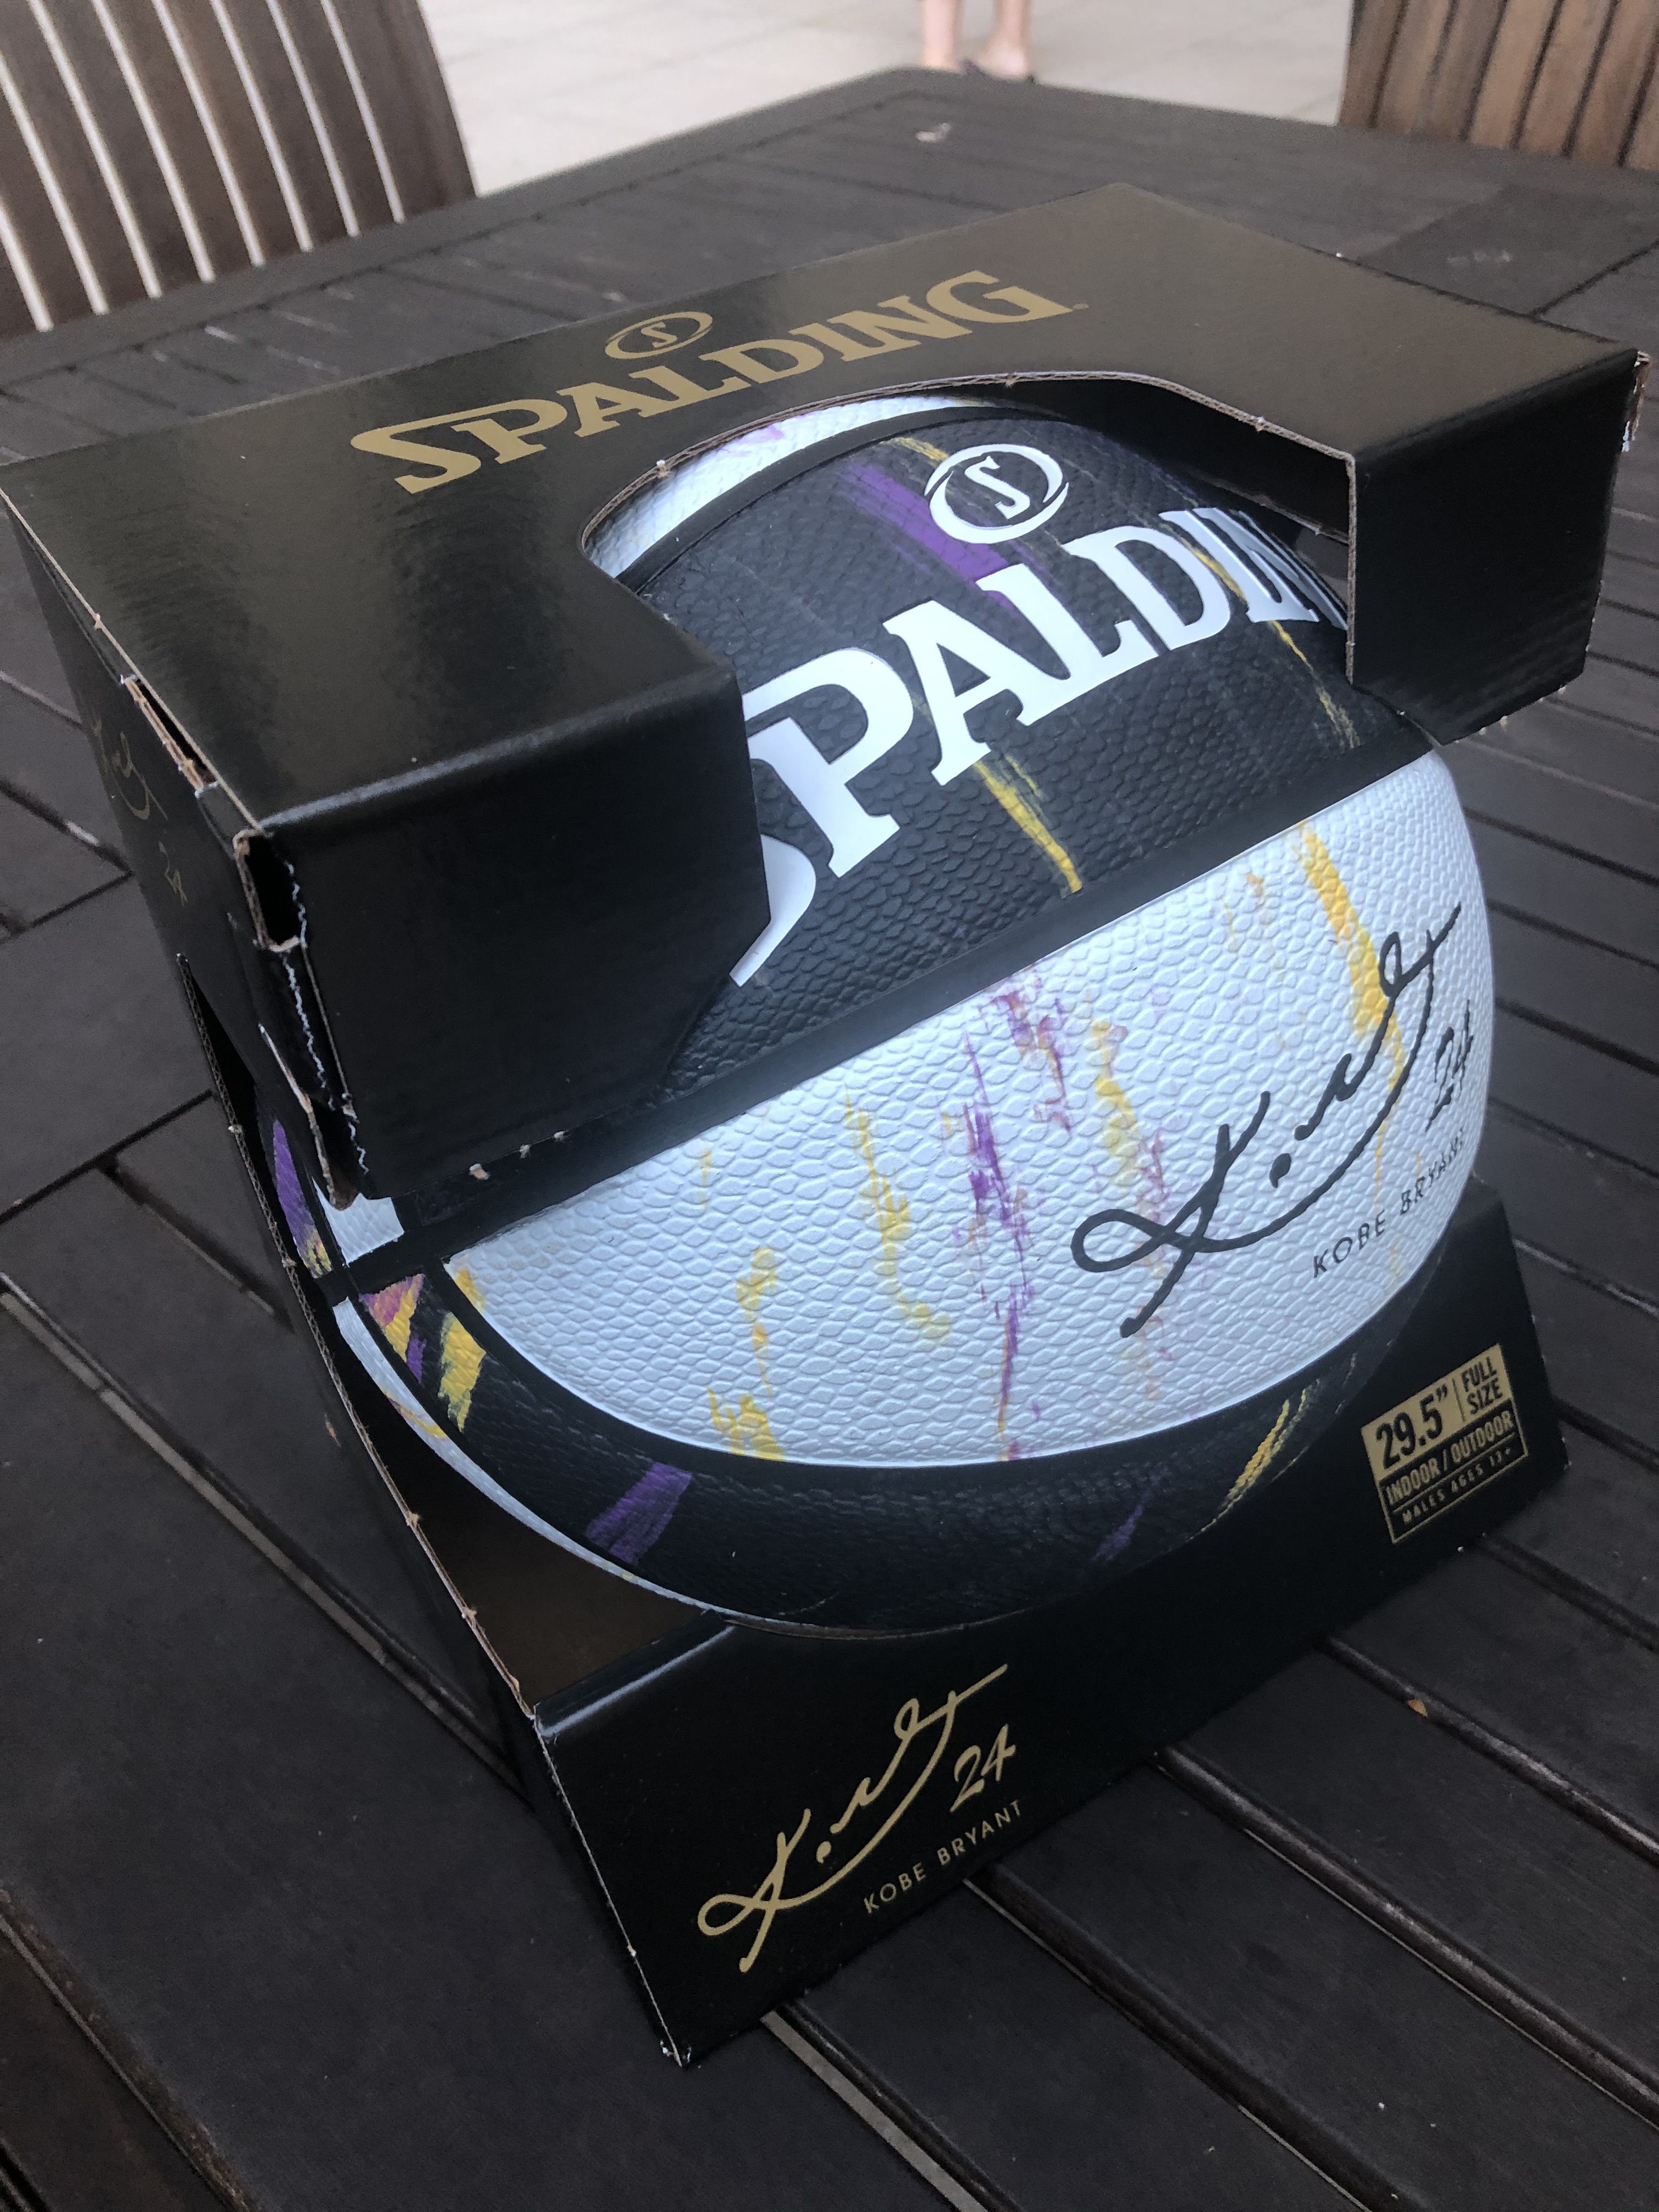 SPALDING X Kobe Bryant Basketball Marbled Snake Series Signature Limited Edition 